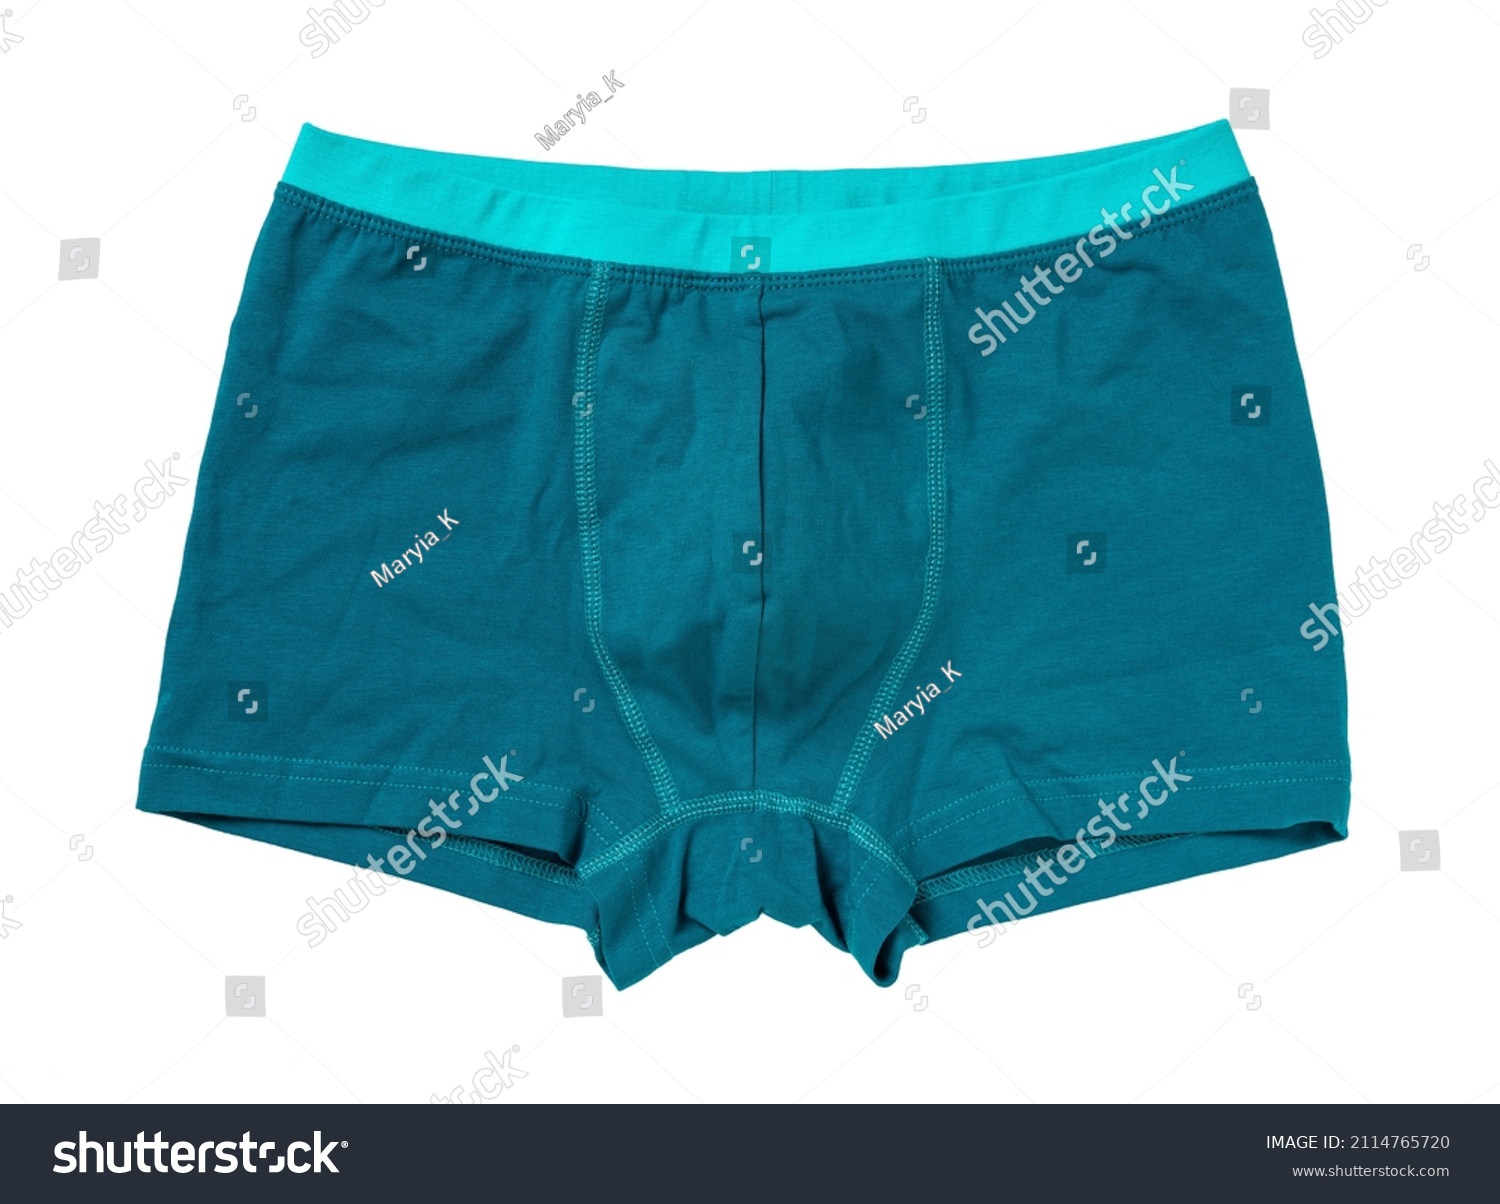 Mens boxer briefs isolated on a white background. Blue male underwear cutout. Man trunks of elastic cotton fabric close-up. Modern mens underpants concept. New clean underclothes. Top view. #2114765720